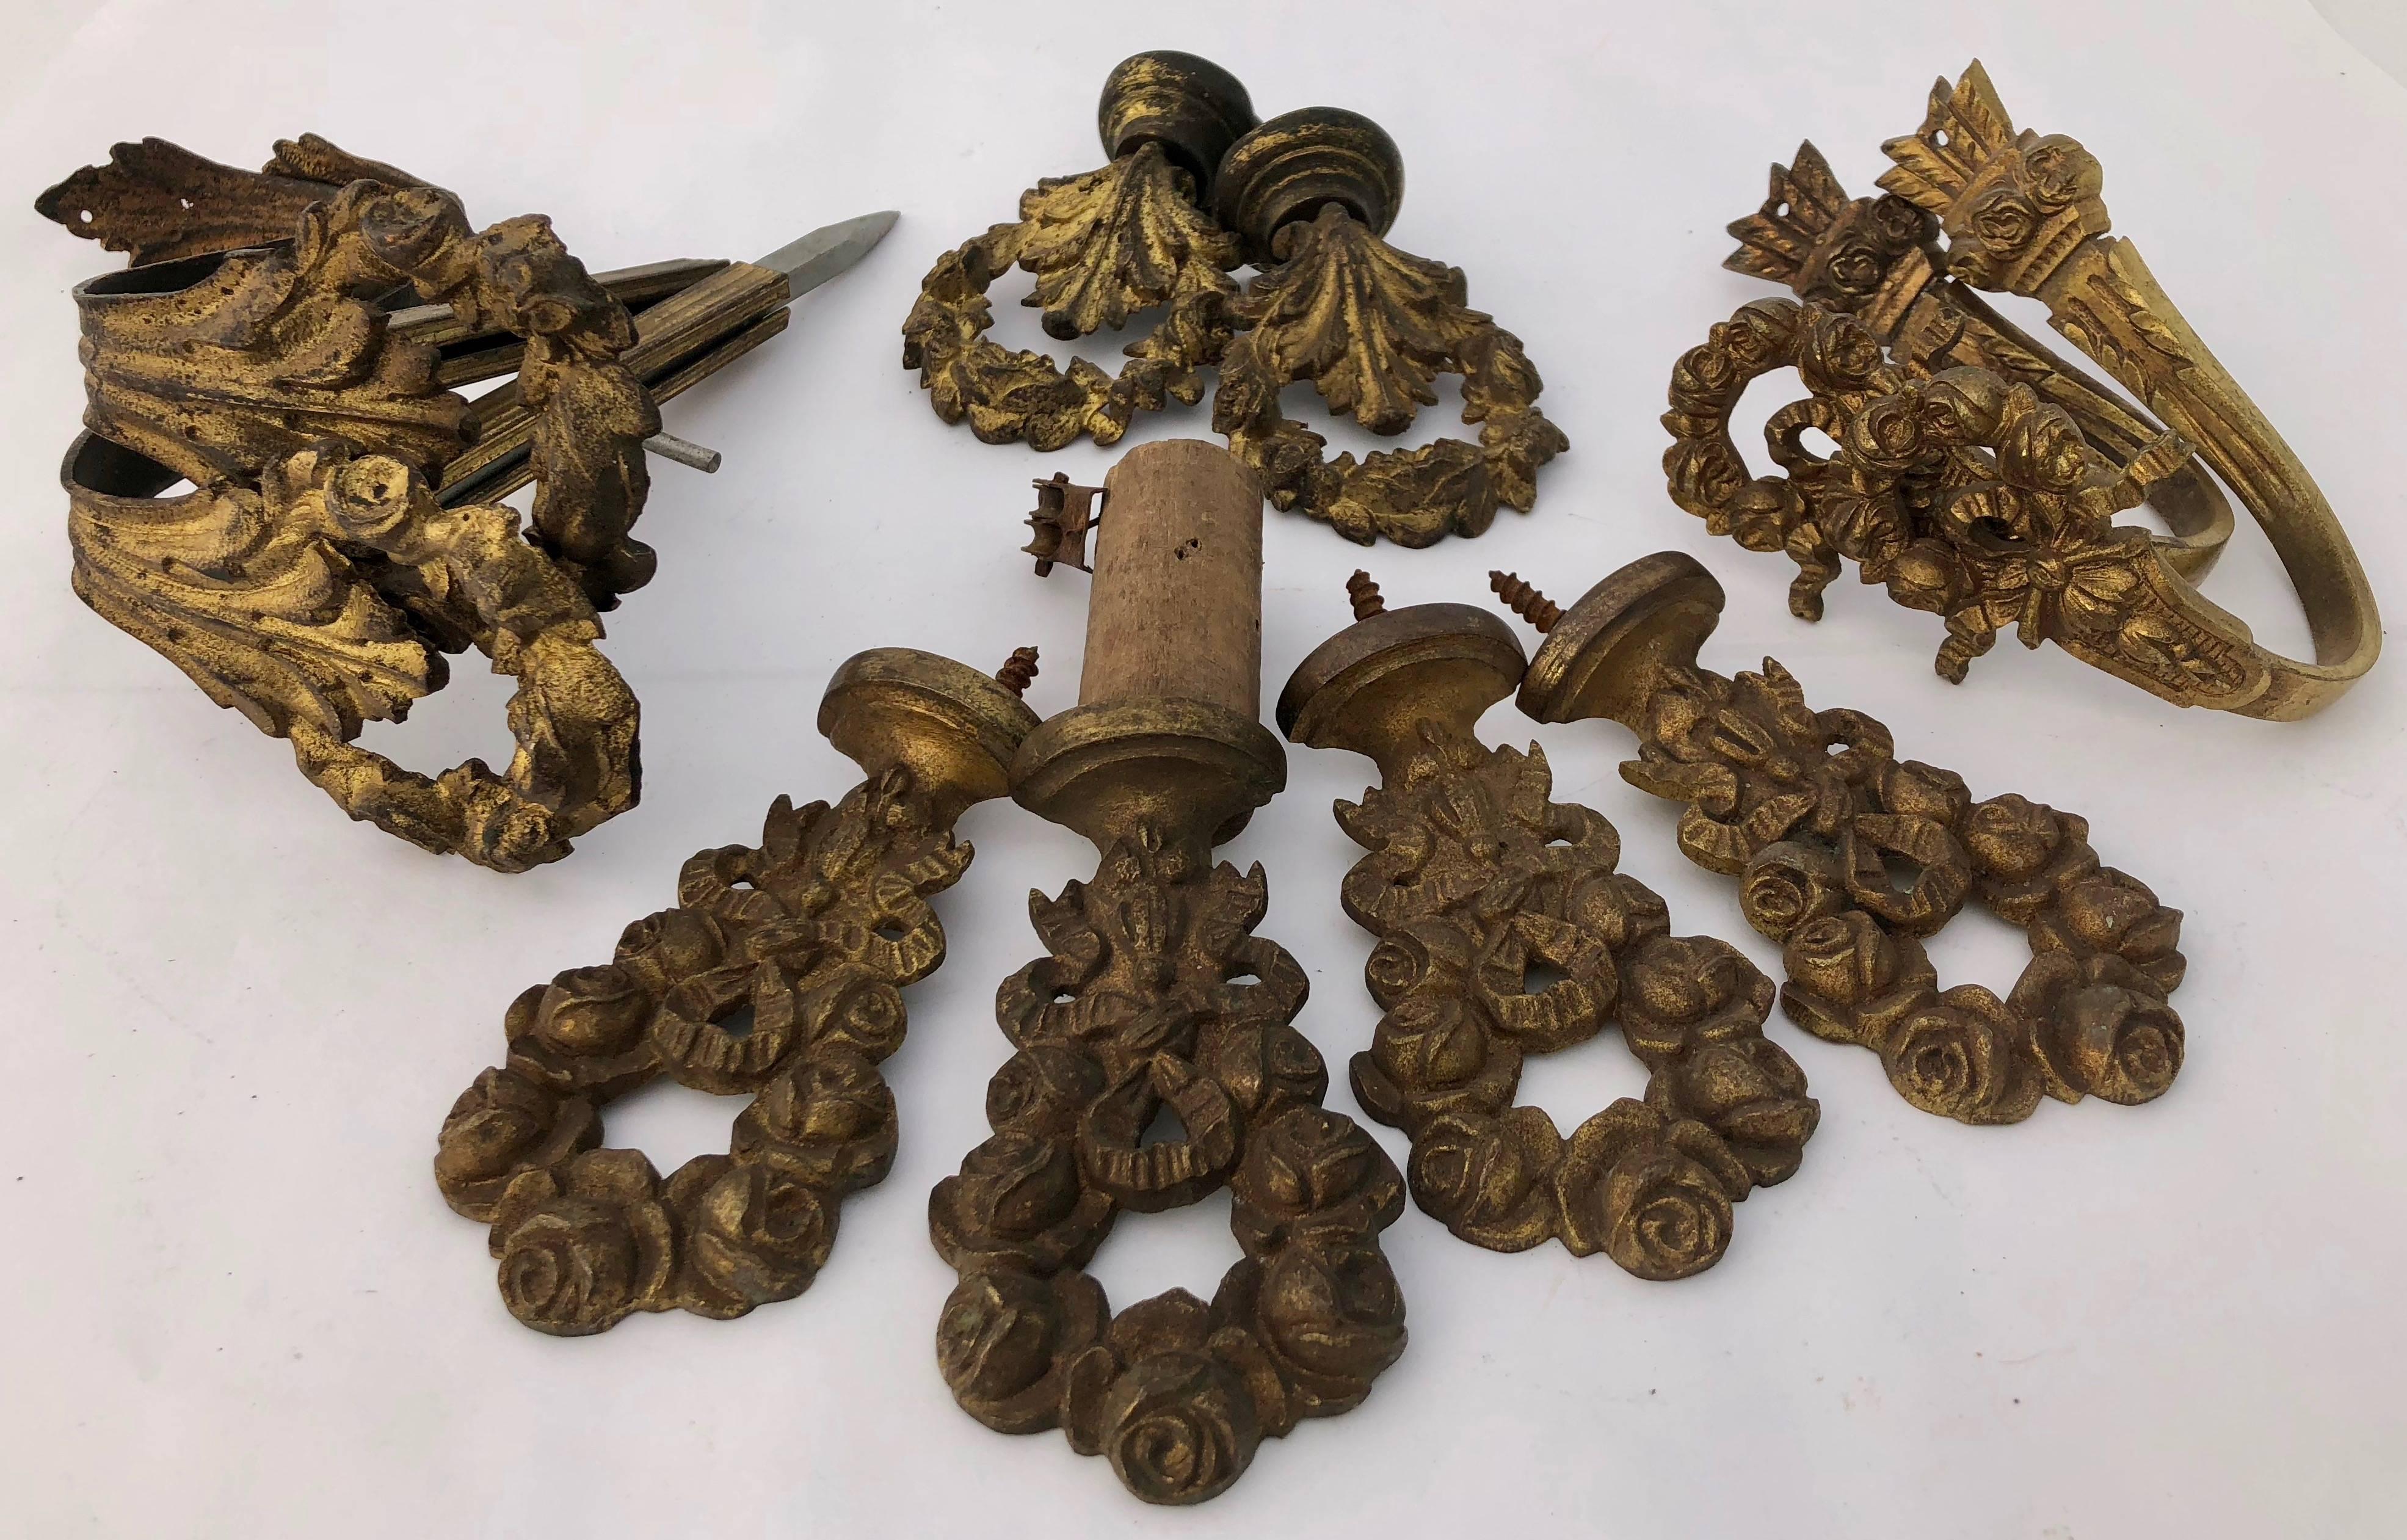 10 French Antique Brass Curtain Rod Ends and Tie Backs in Rose and Lace Designs In Good Condition For Sale In Petaluma, CA